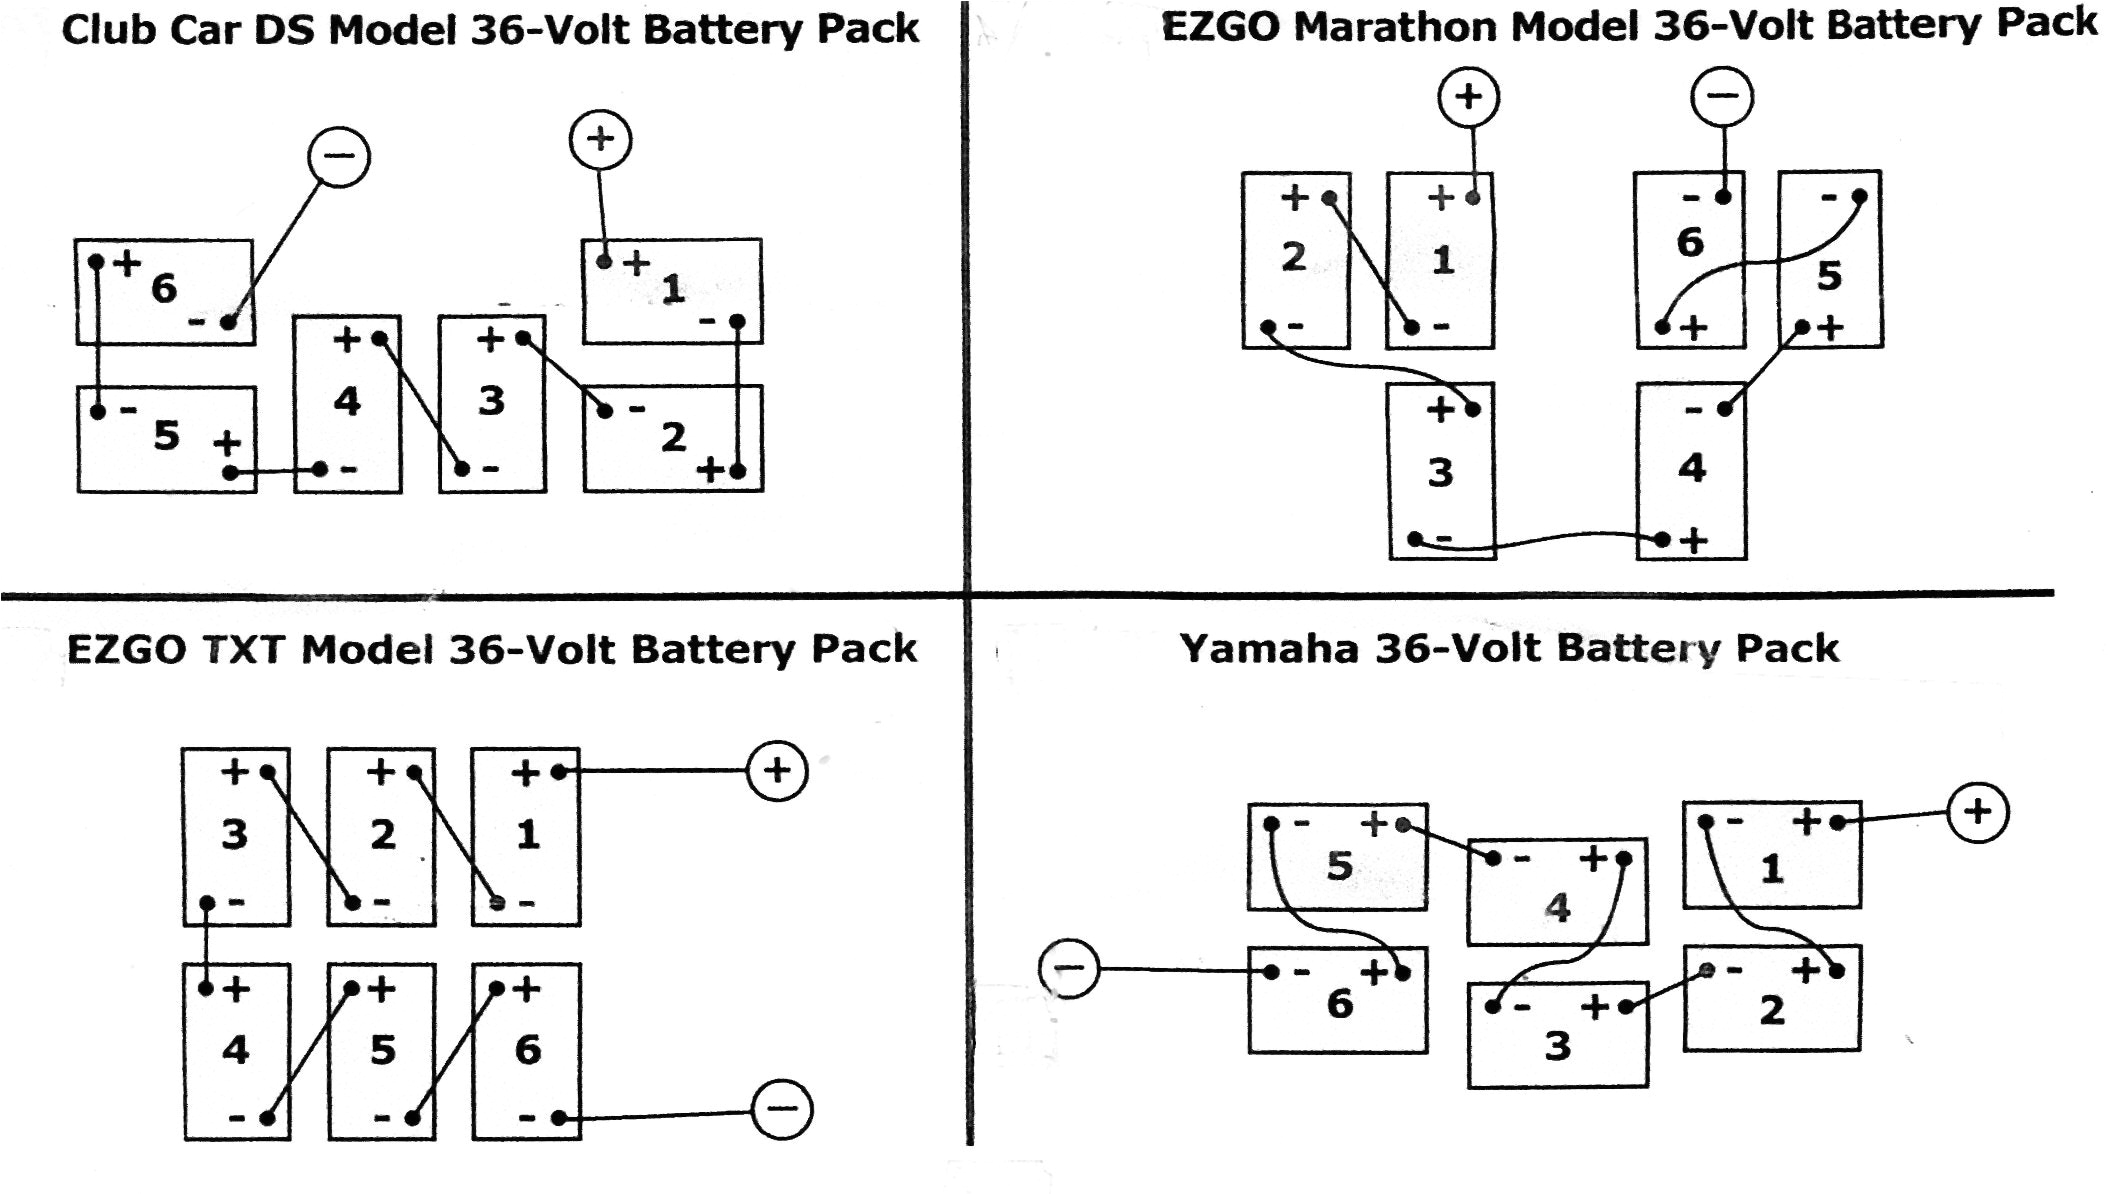 golf cart battery cables unique wiring diagrams for yamaha golf carts refrence ez golf cart battery images of golf cart battery cables jpg